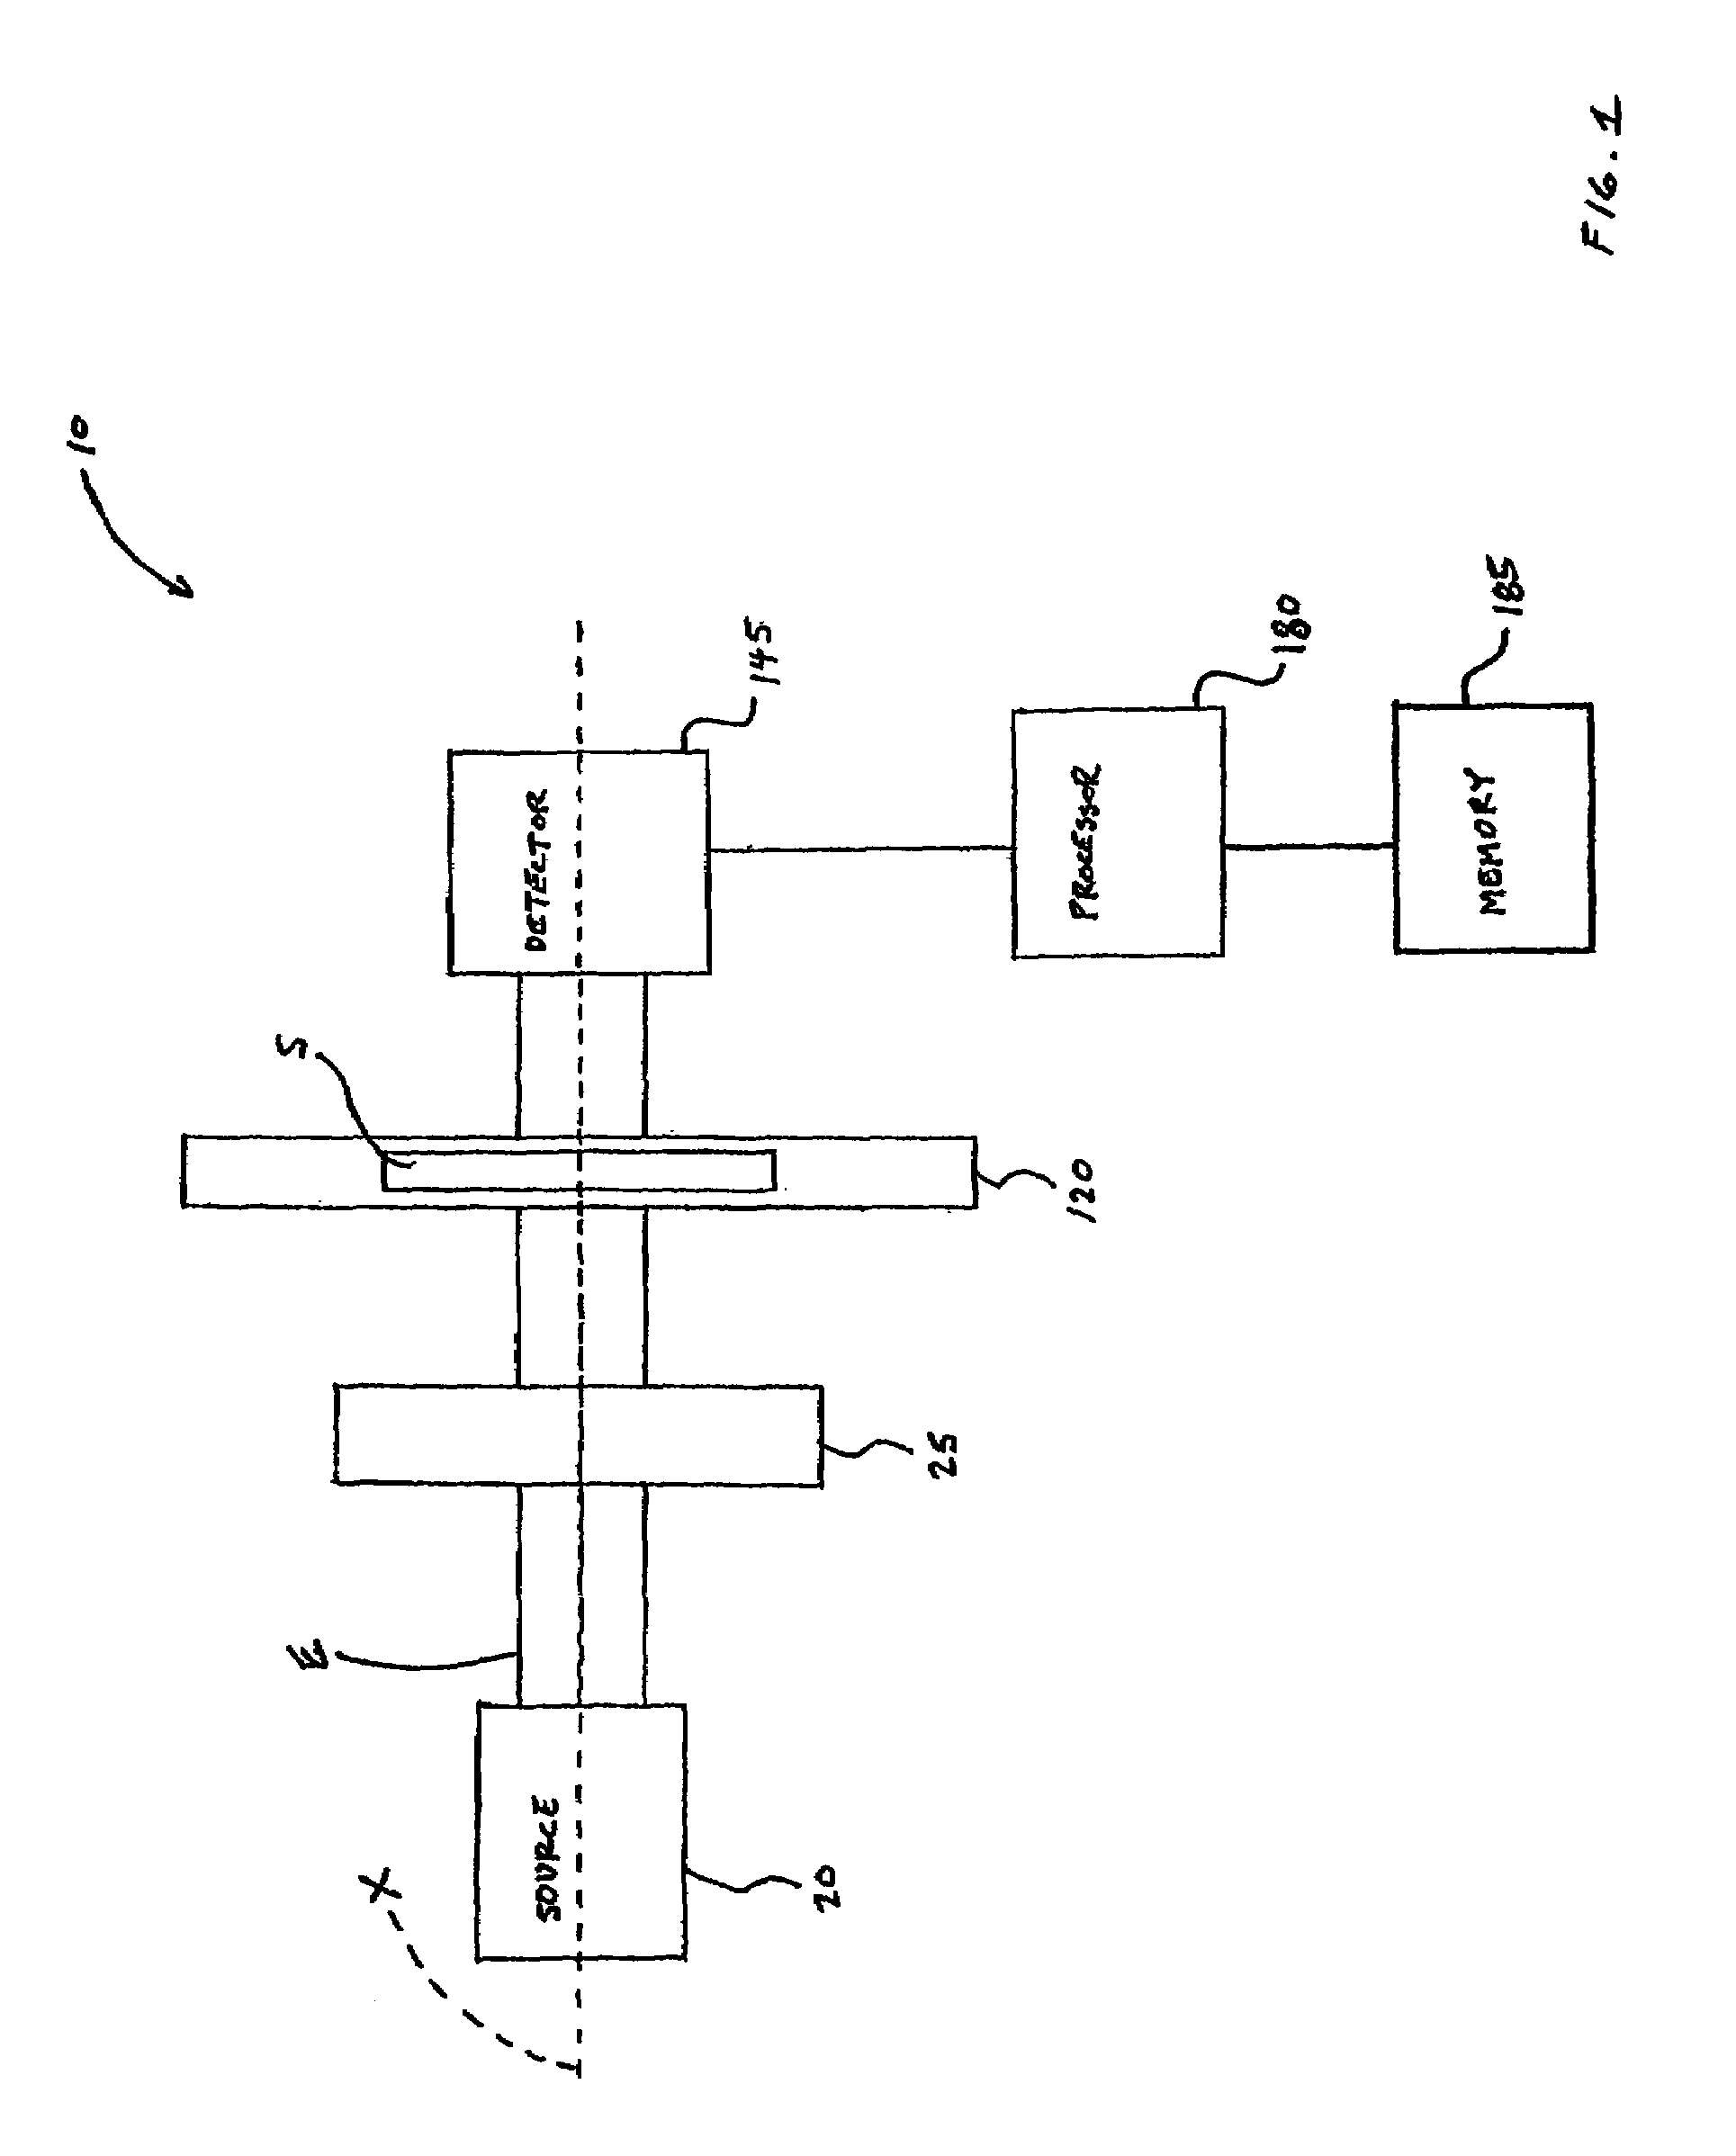 Method of determining analyte concentration in a sample using infrared transmission data